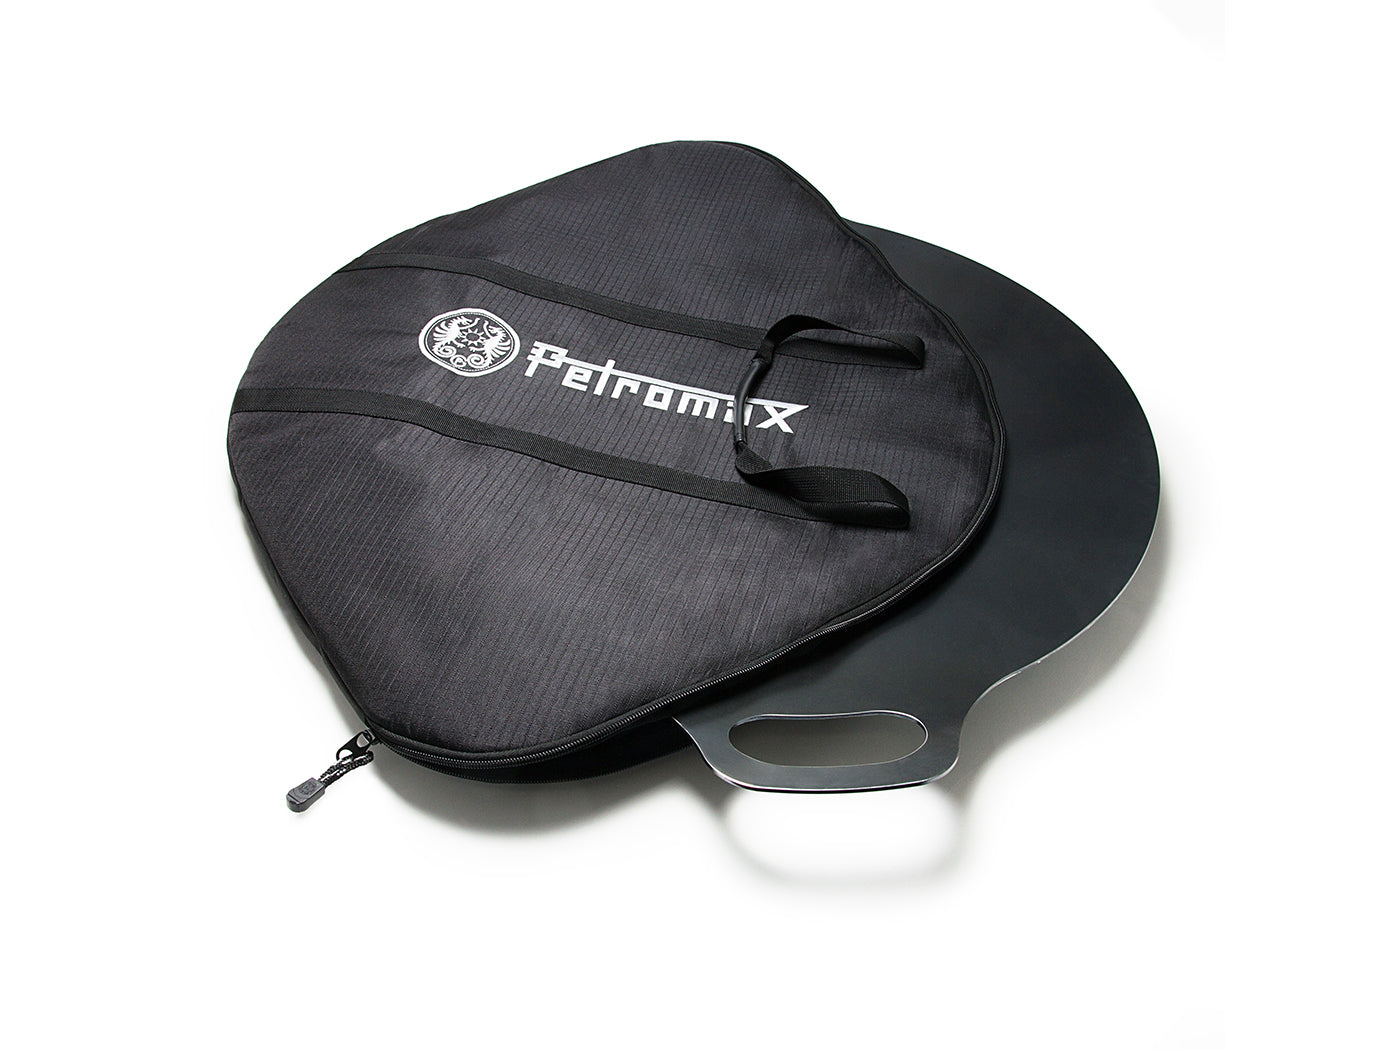 Transport bag for the Petromax fire bowl